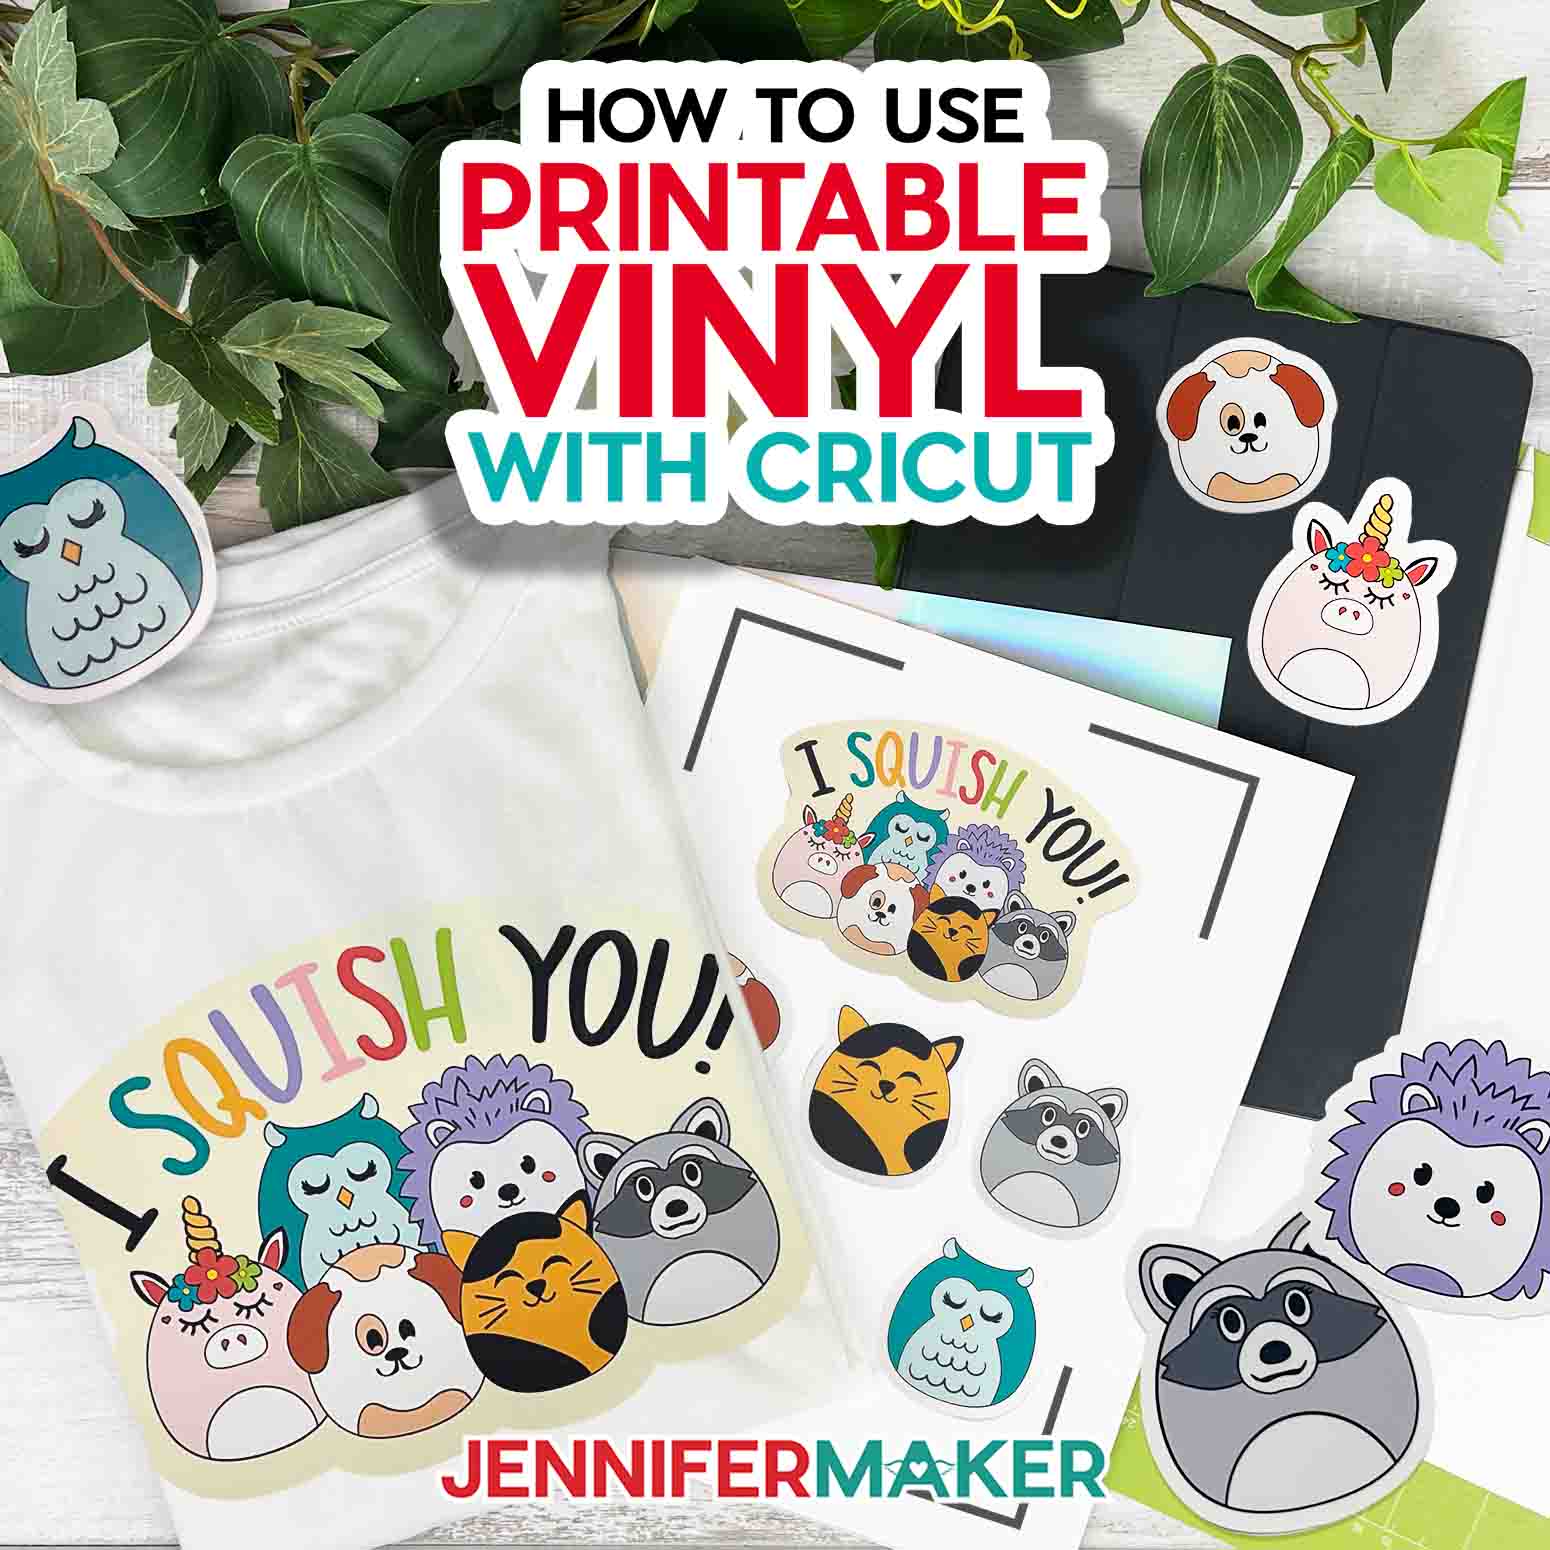 How to Use Printable Vinyl with Cricut, Step by Step!